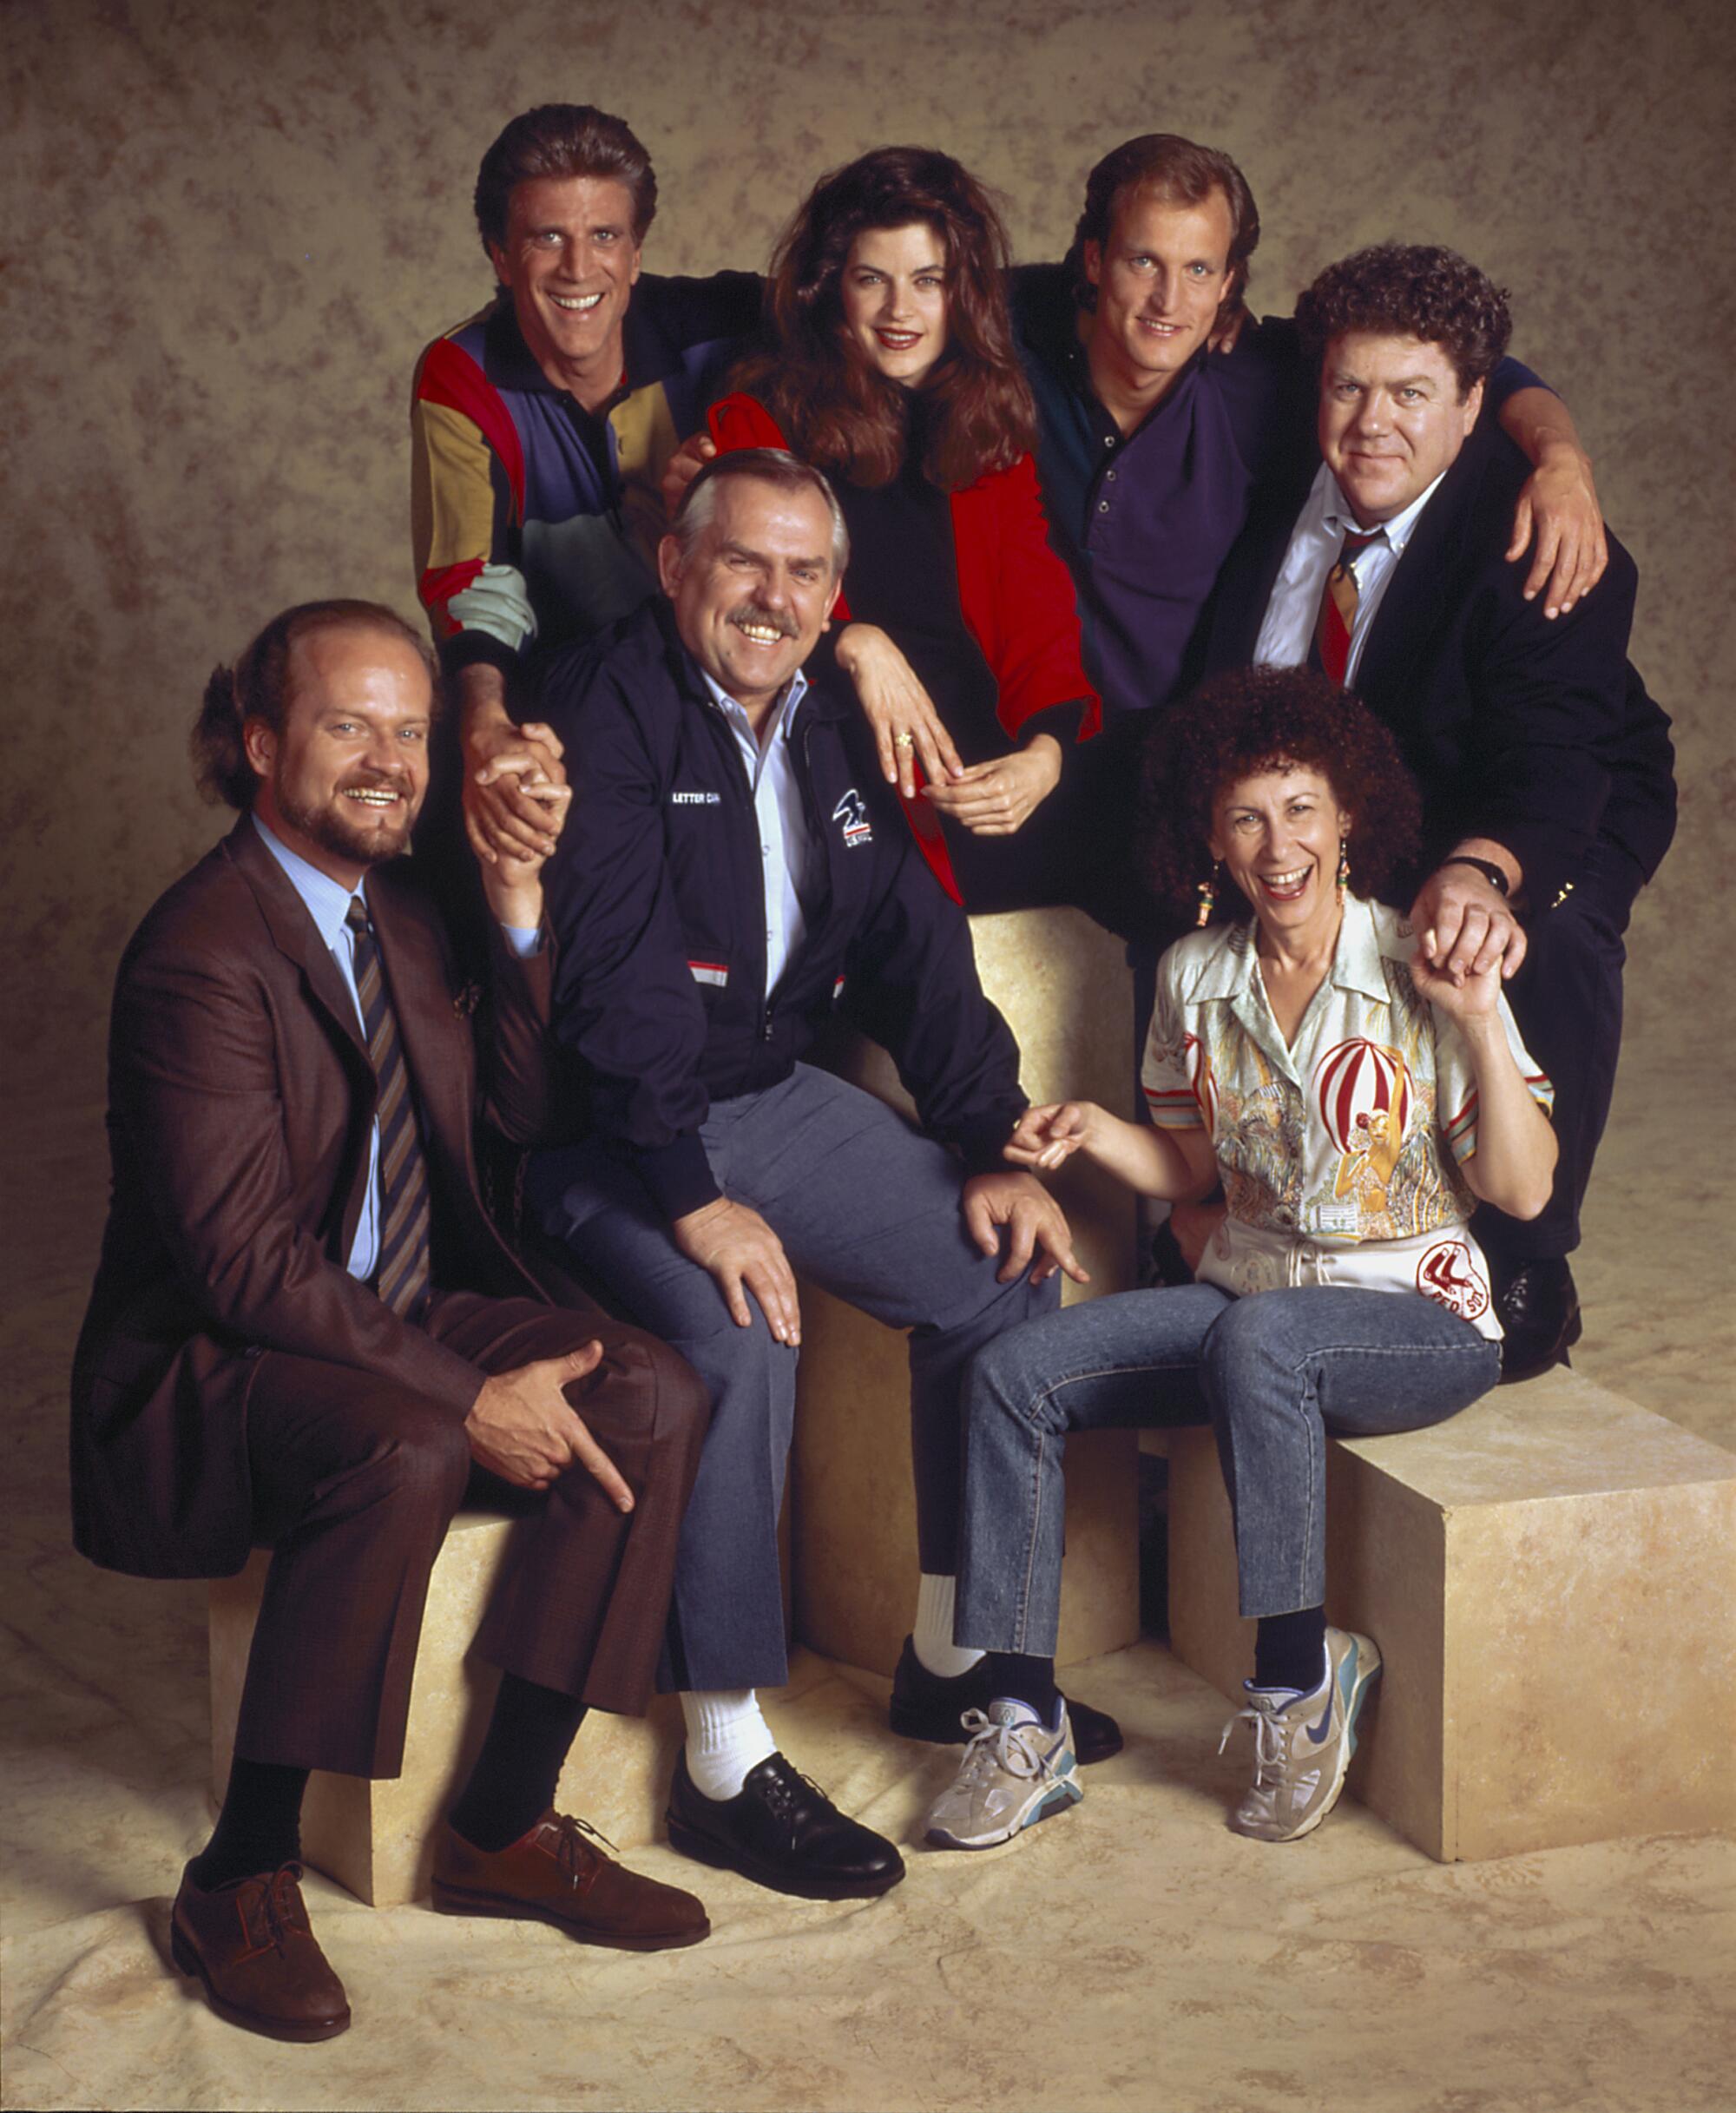 Kirstie Alley and the rest of the "Cheers" cast.